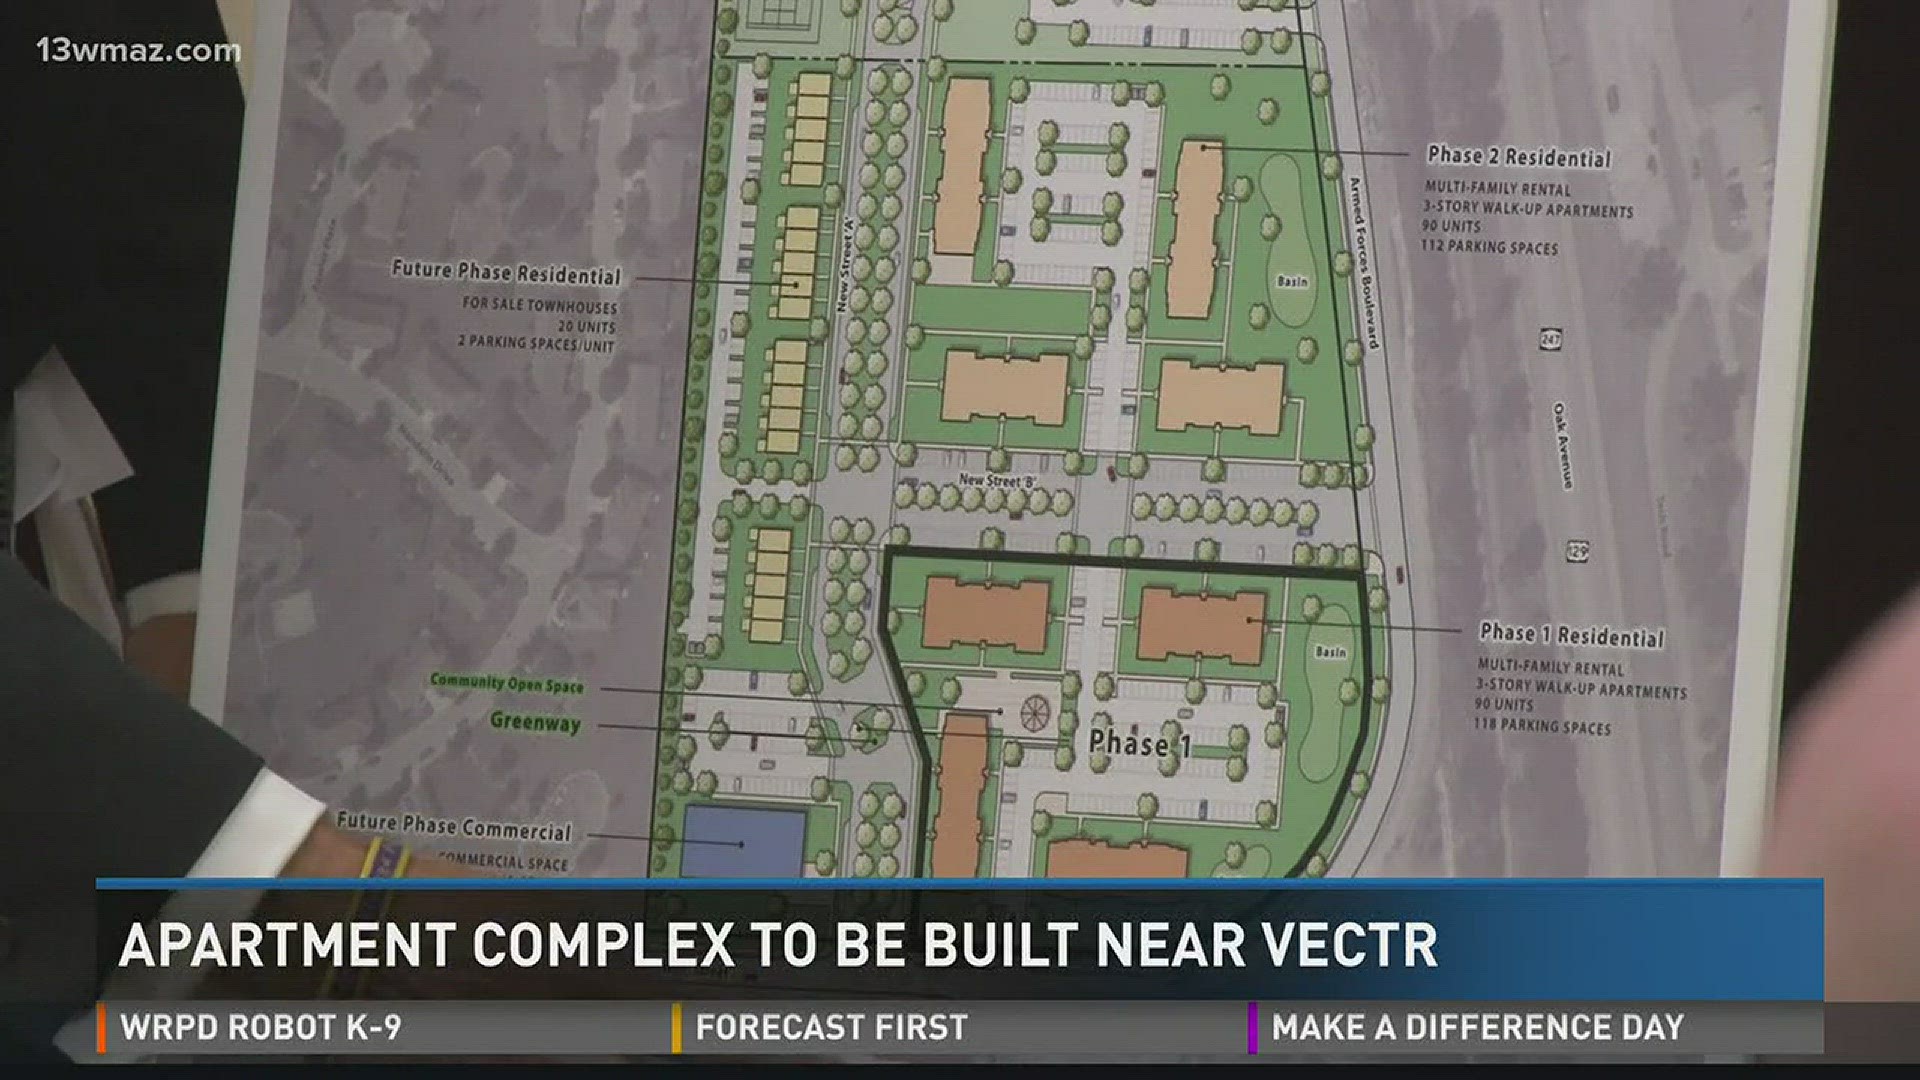 Apartment complex to be built near VECTR